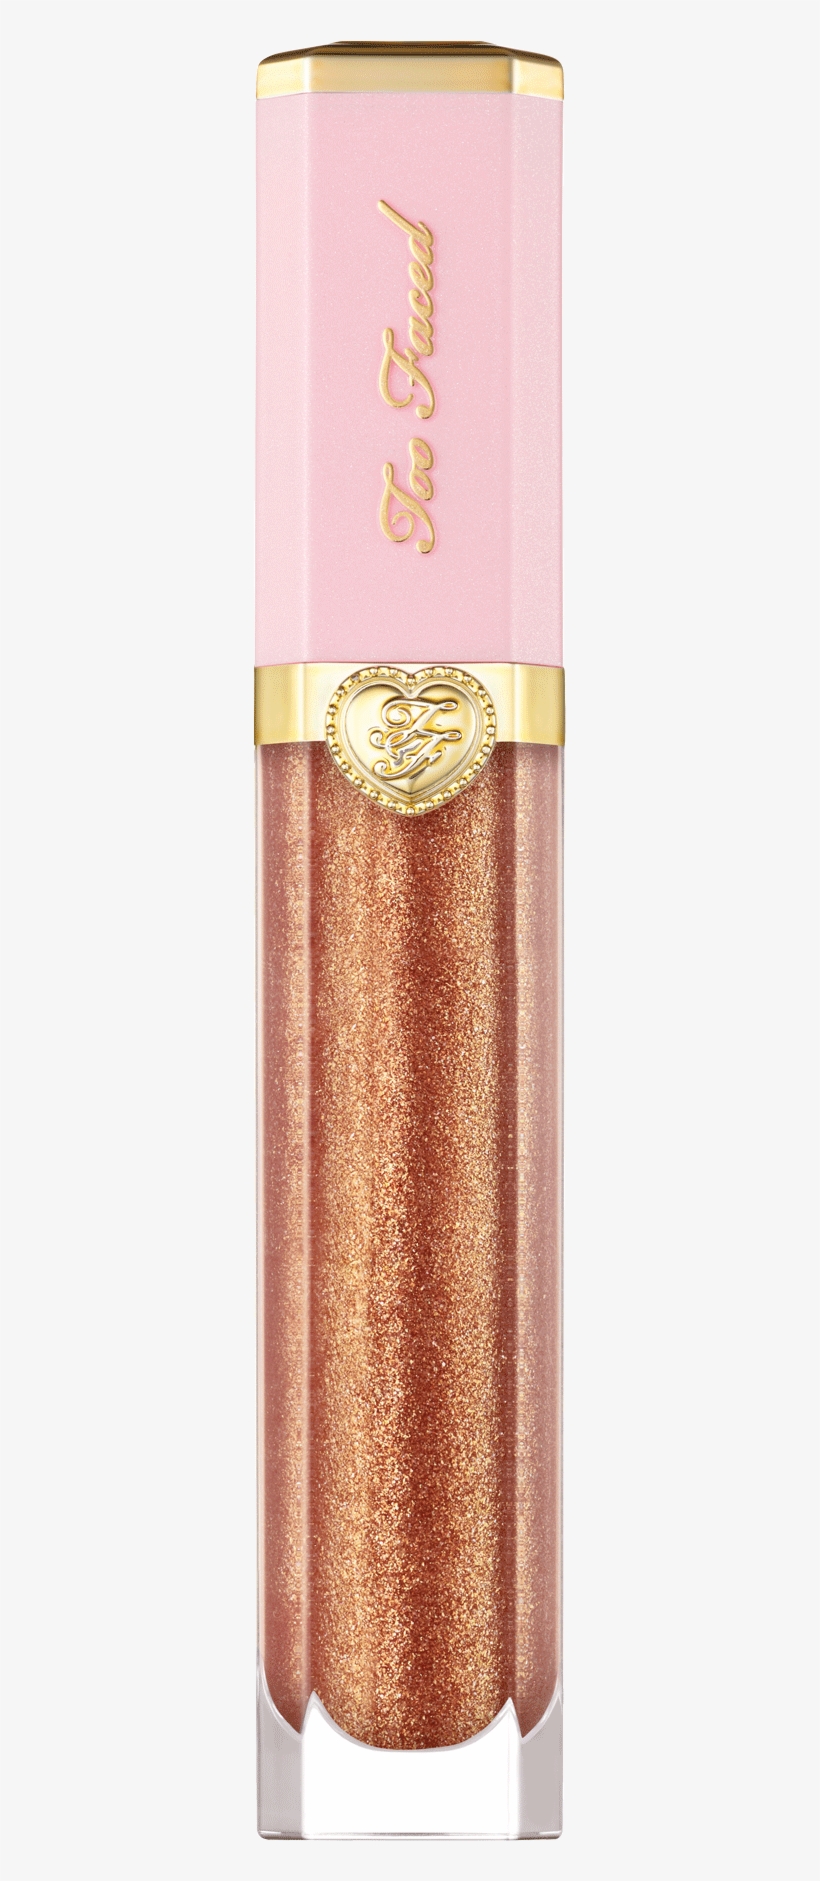 Rich - Too Faced Pretty Rich Lip, transparent png #9741142